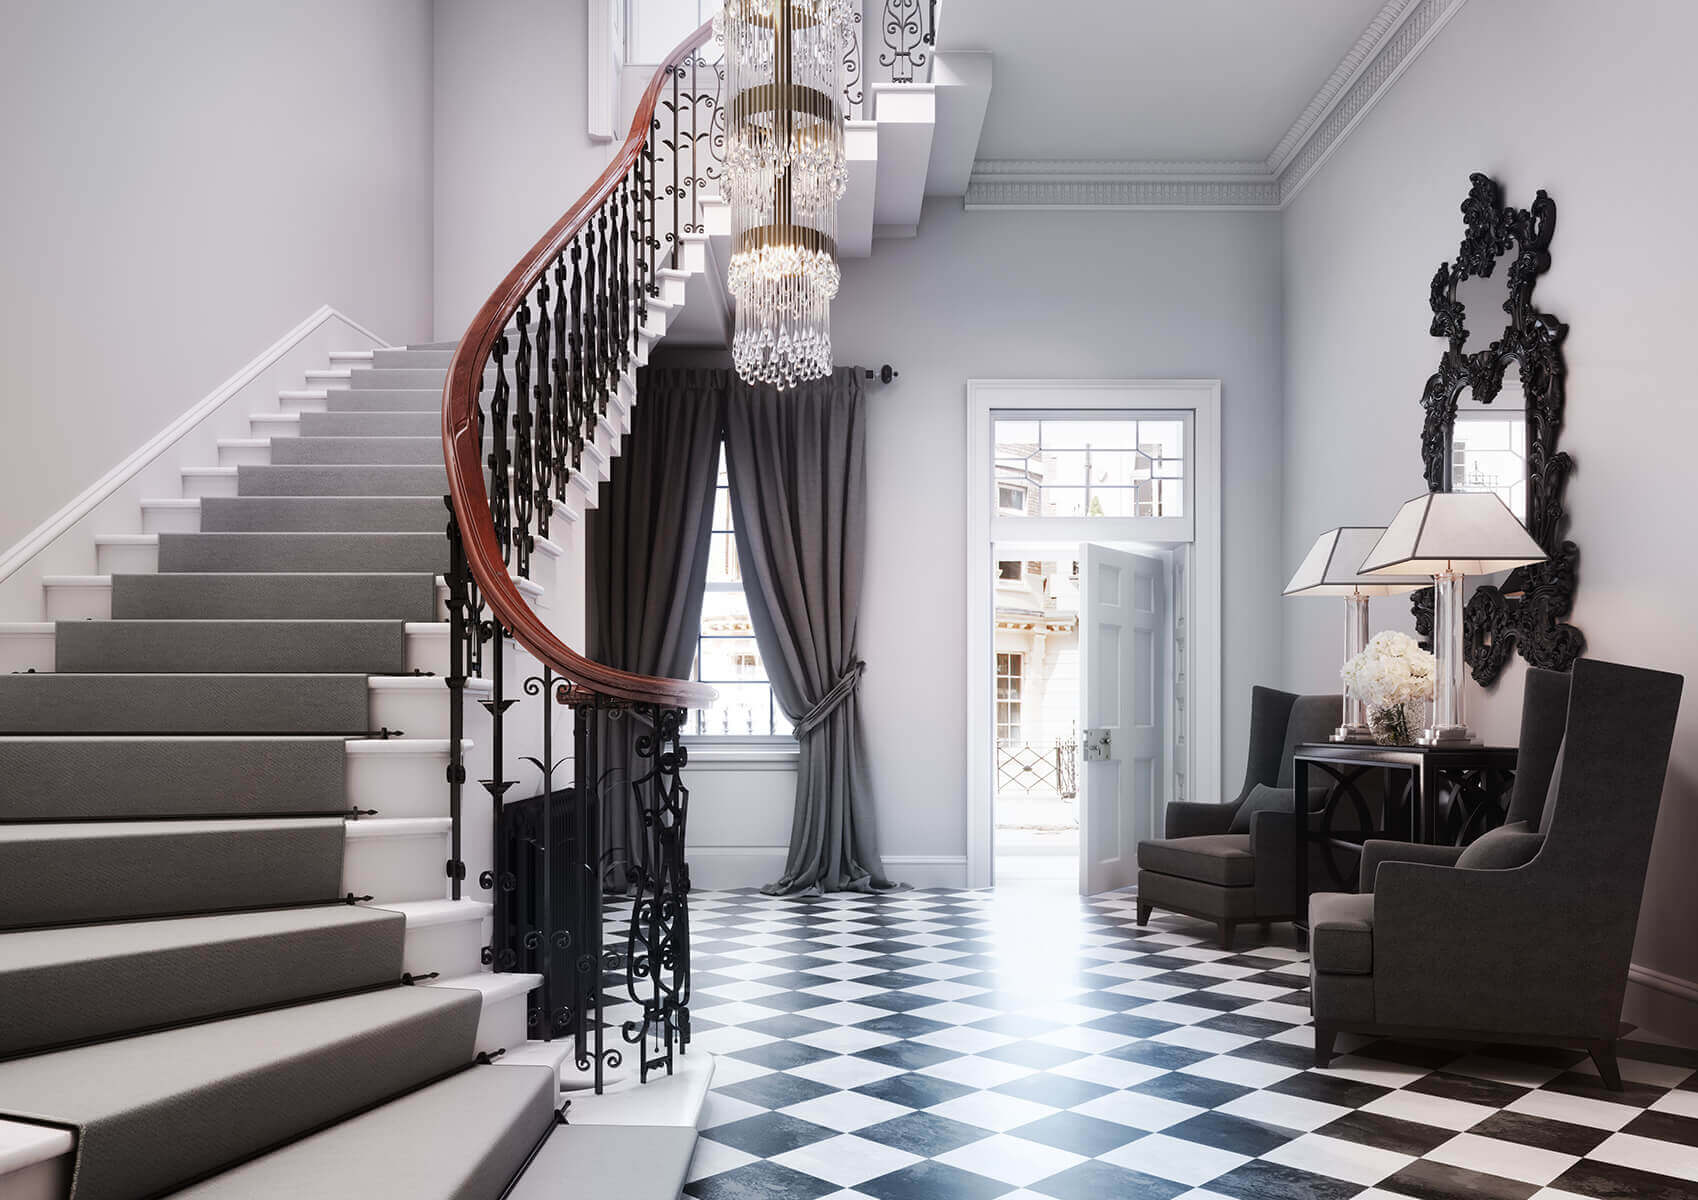 Mayfair Mansion – ‘Britain’s most expensive fixer-upper’ architectural visualisation  